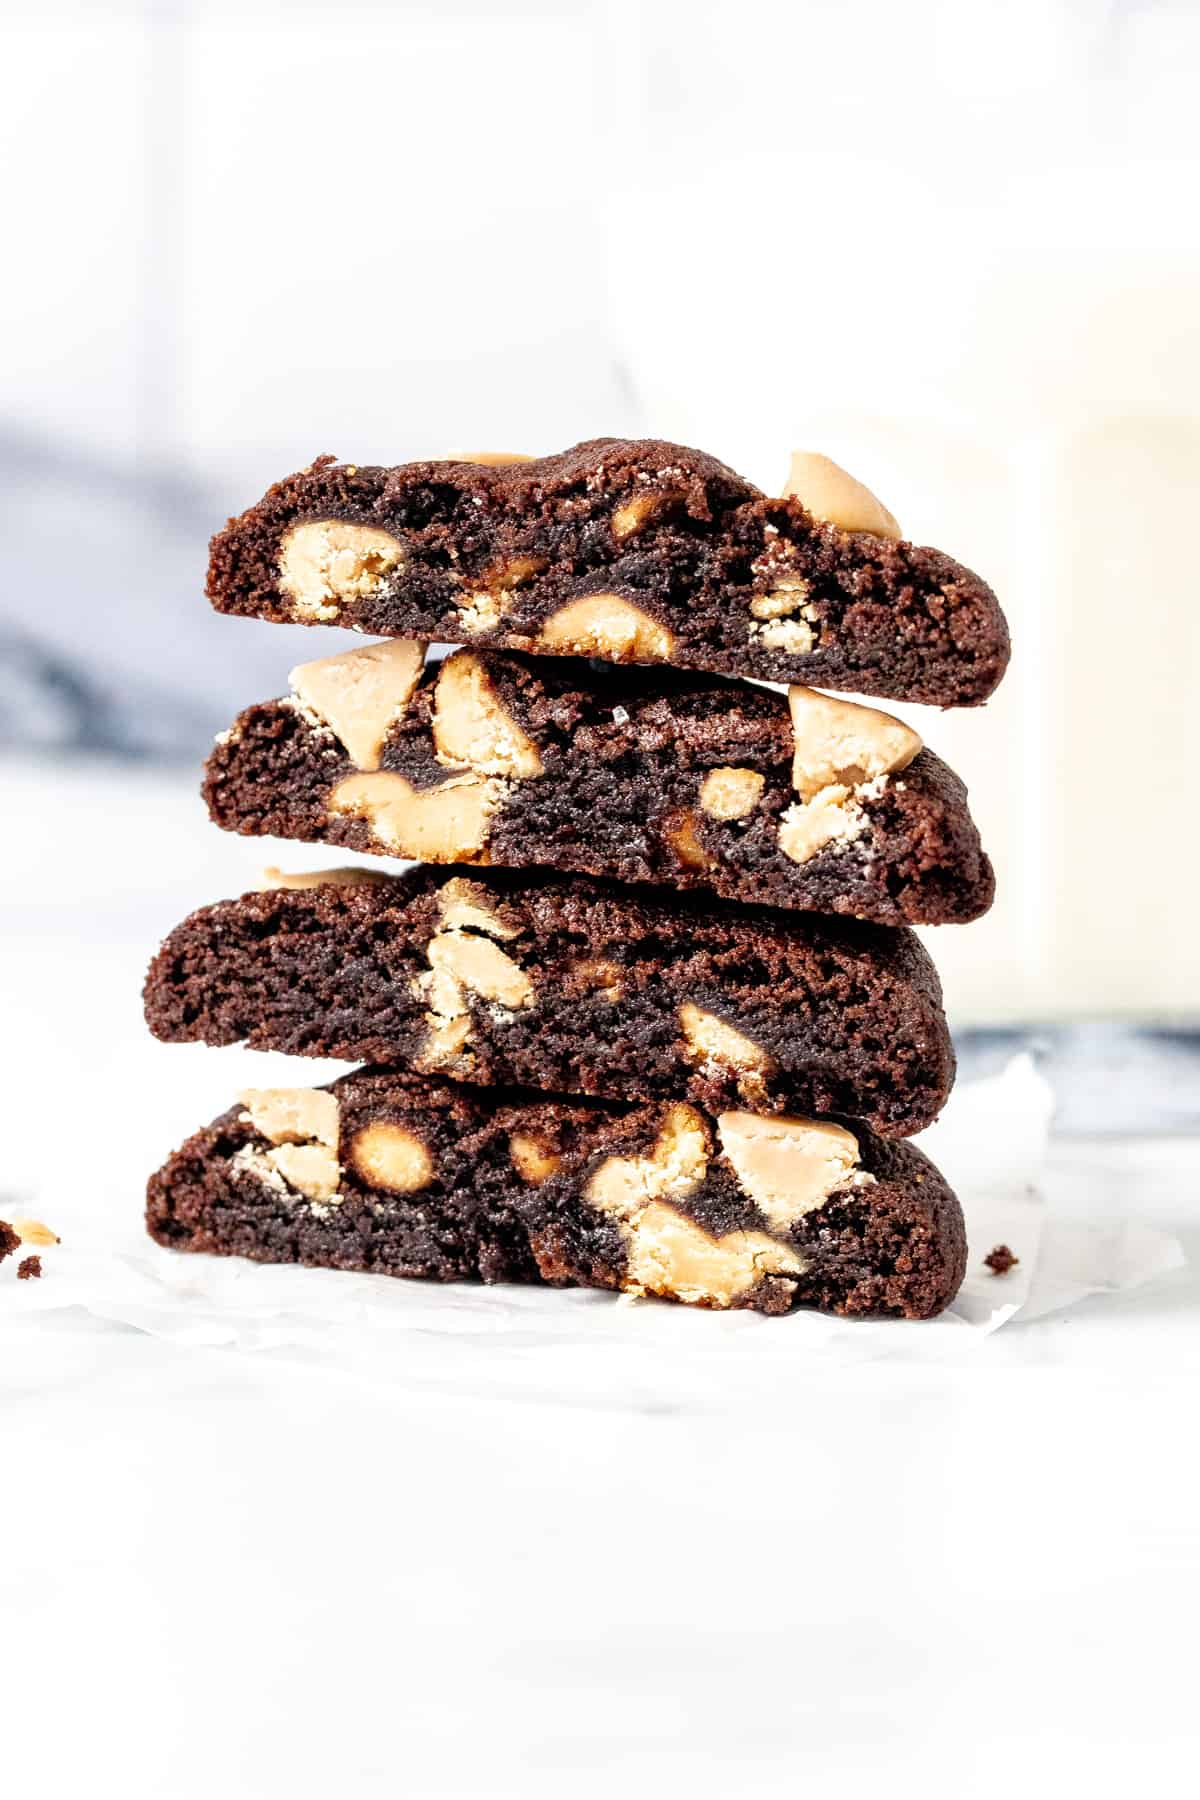 Stack of 4 halves of chocolate cookies with caramel chips